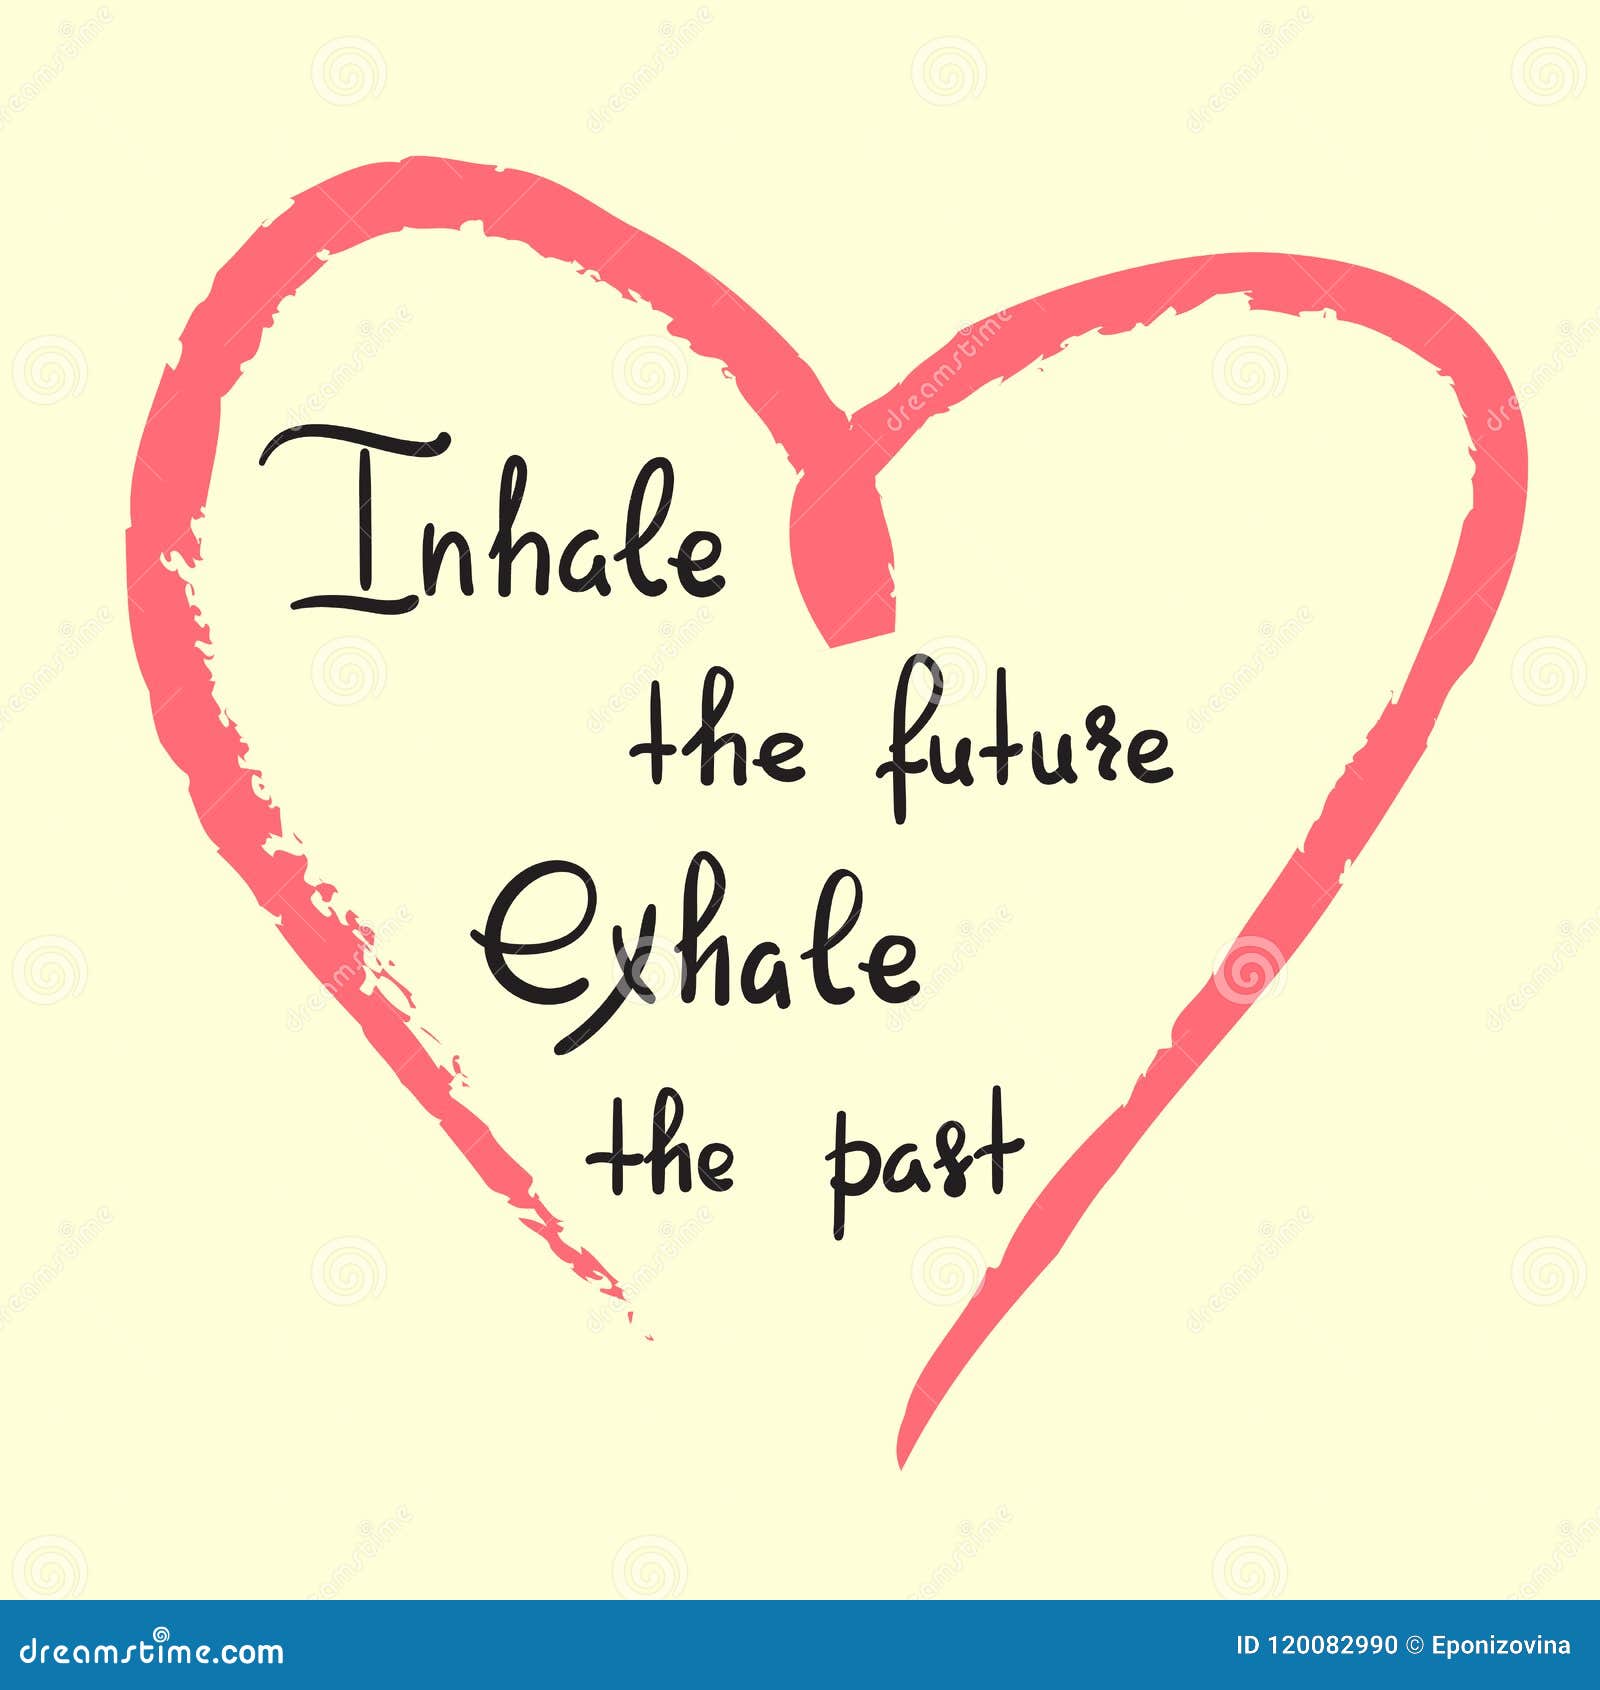 Inhale the future exhale the past Motivational and inspirational sticker quotes notebook or a gift. waterproof vinyl sticker for laptop